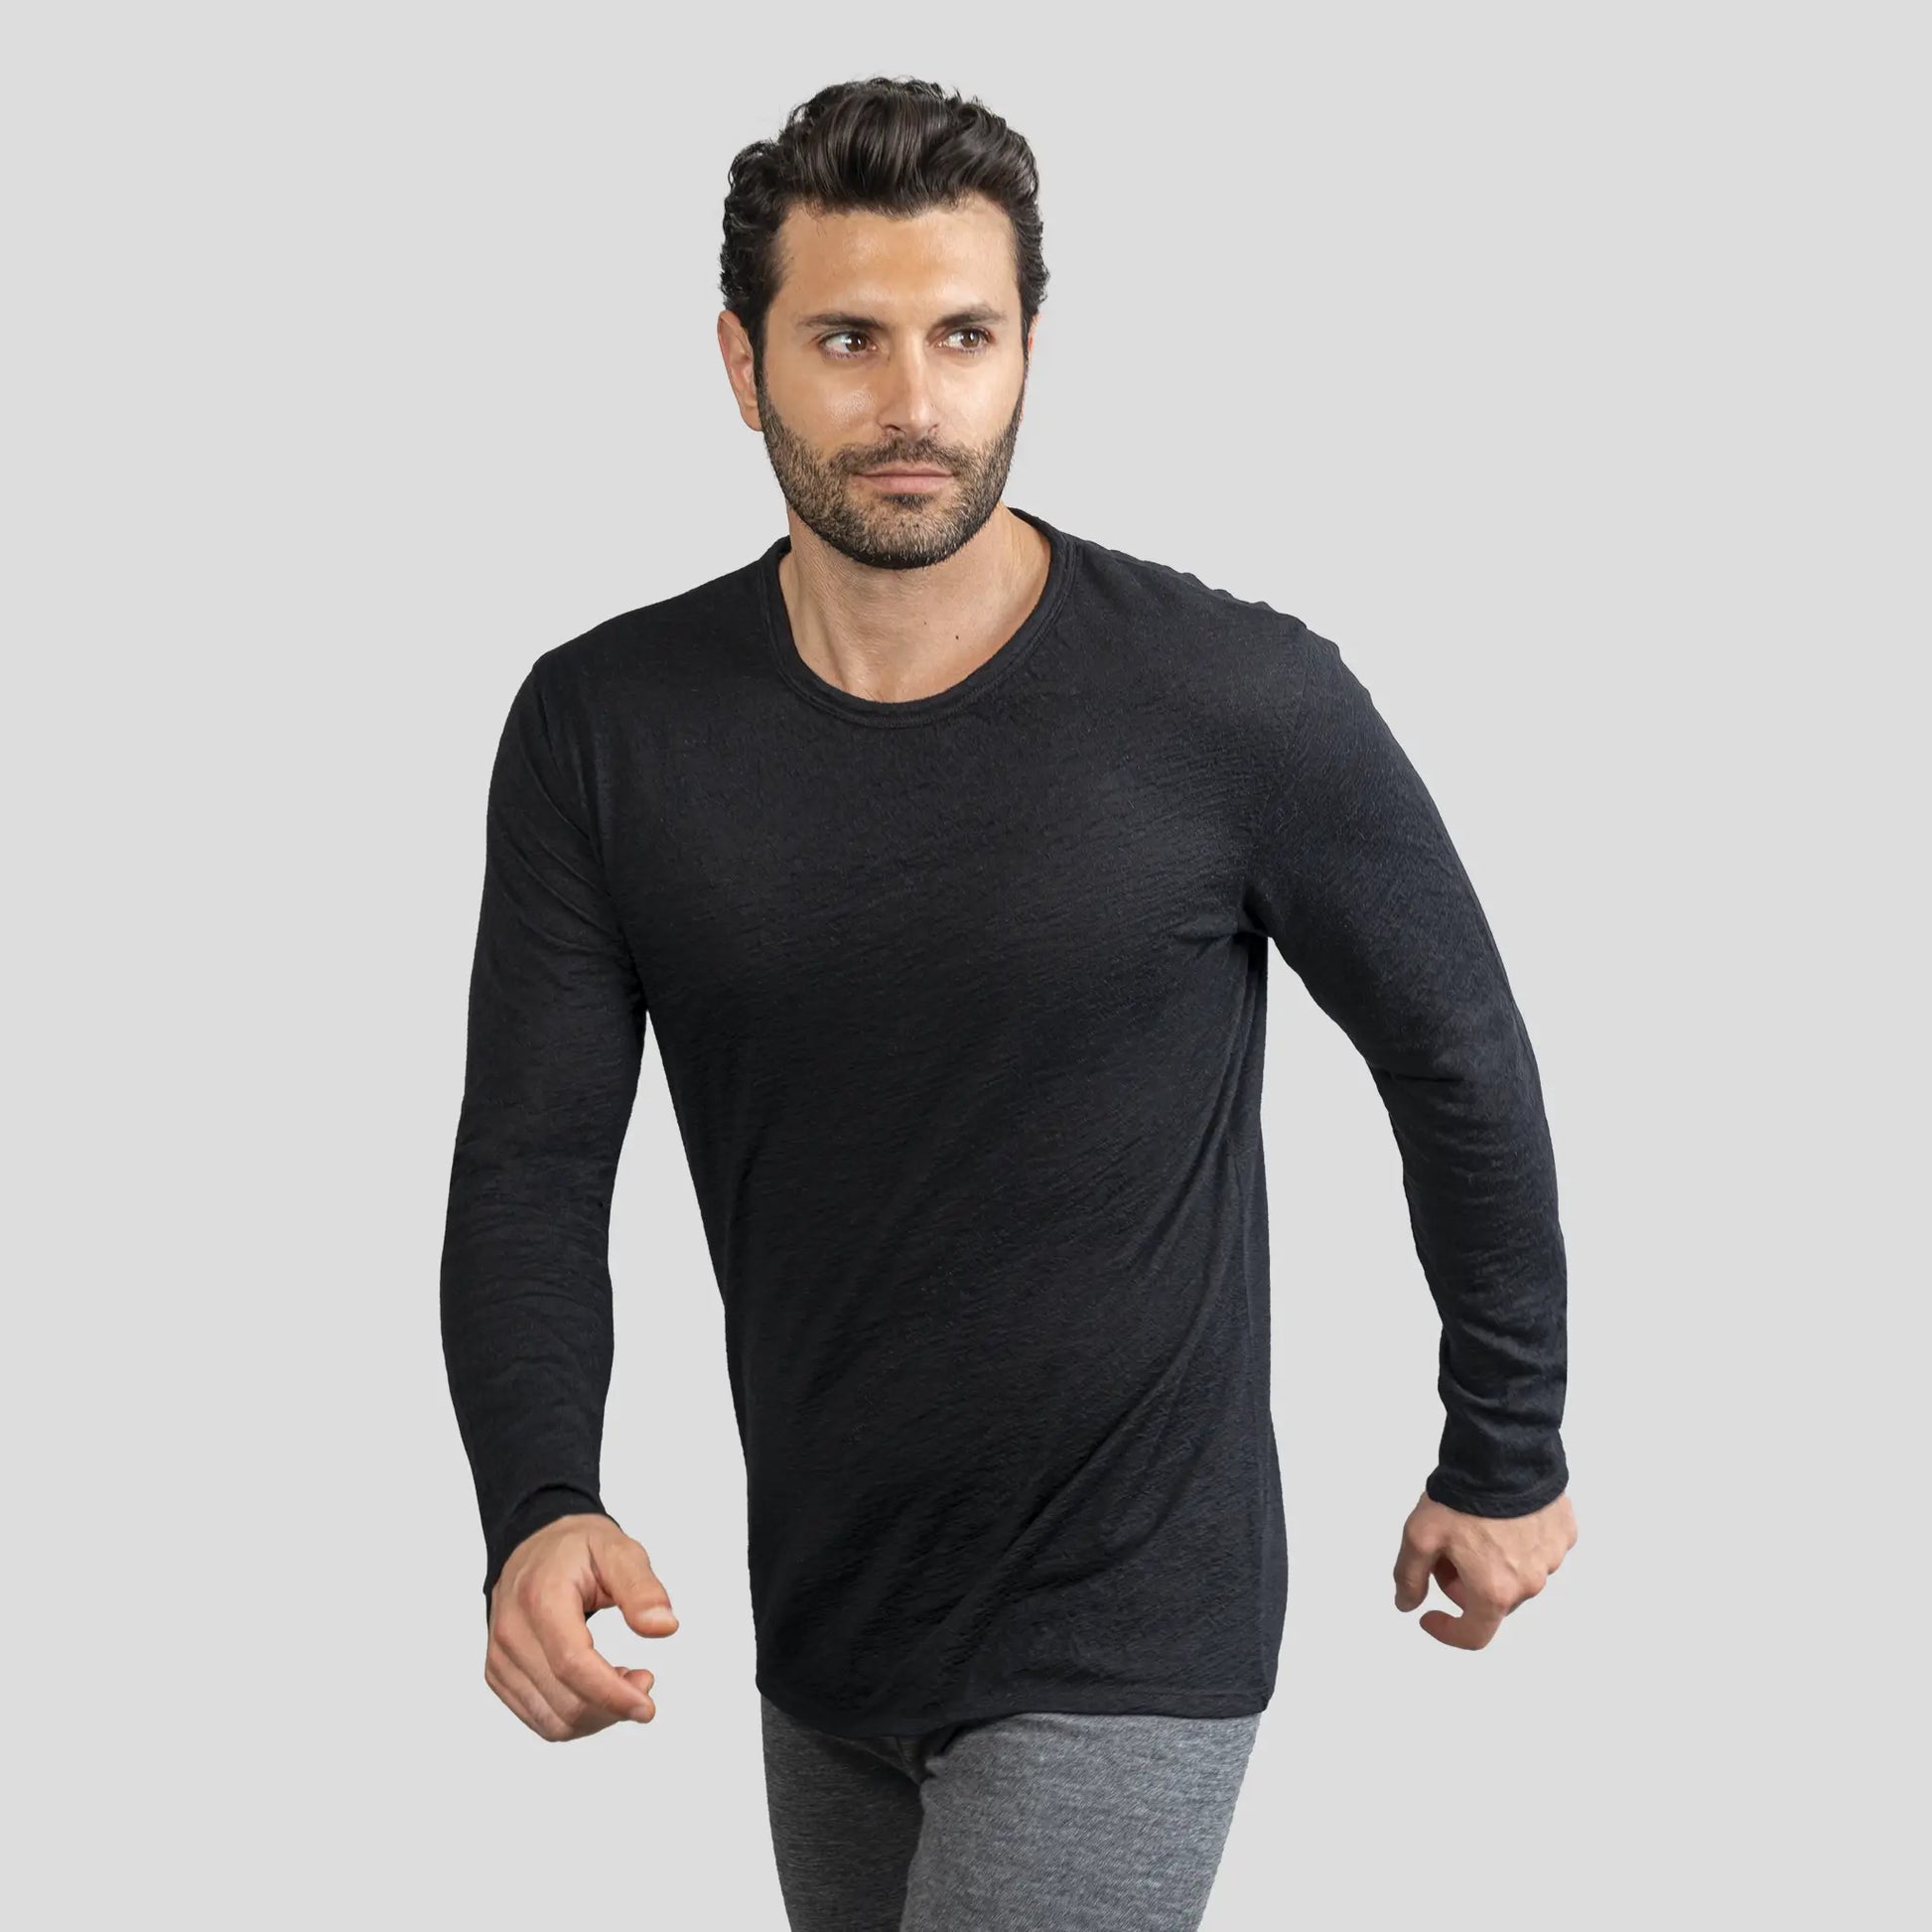 Arms of Andes Men's 160 Ultralight Alpaca Wool Long-Sleeve Base Layer Shirt Black S